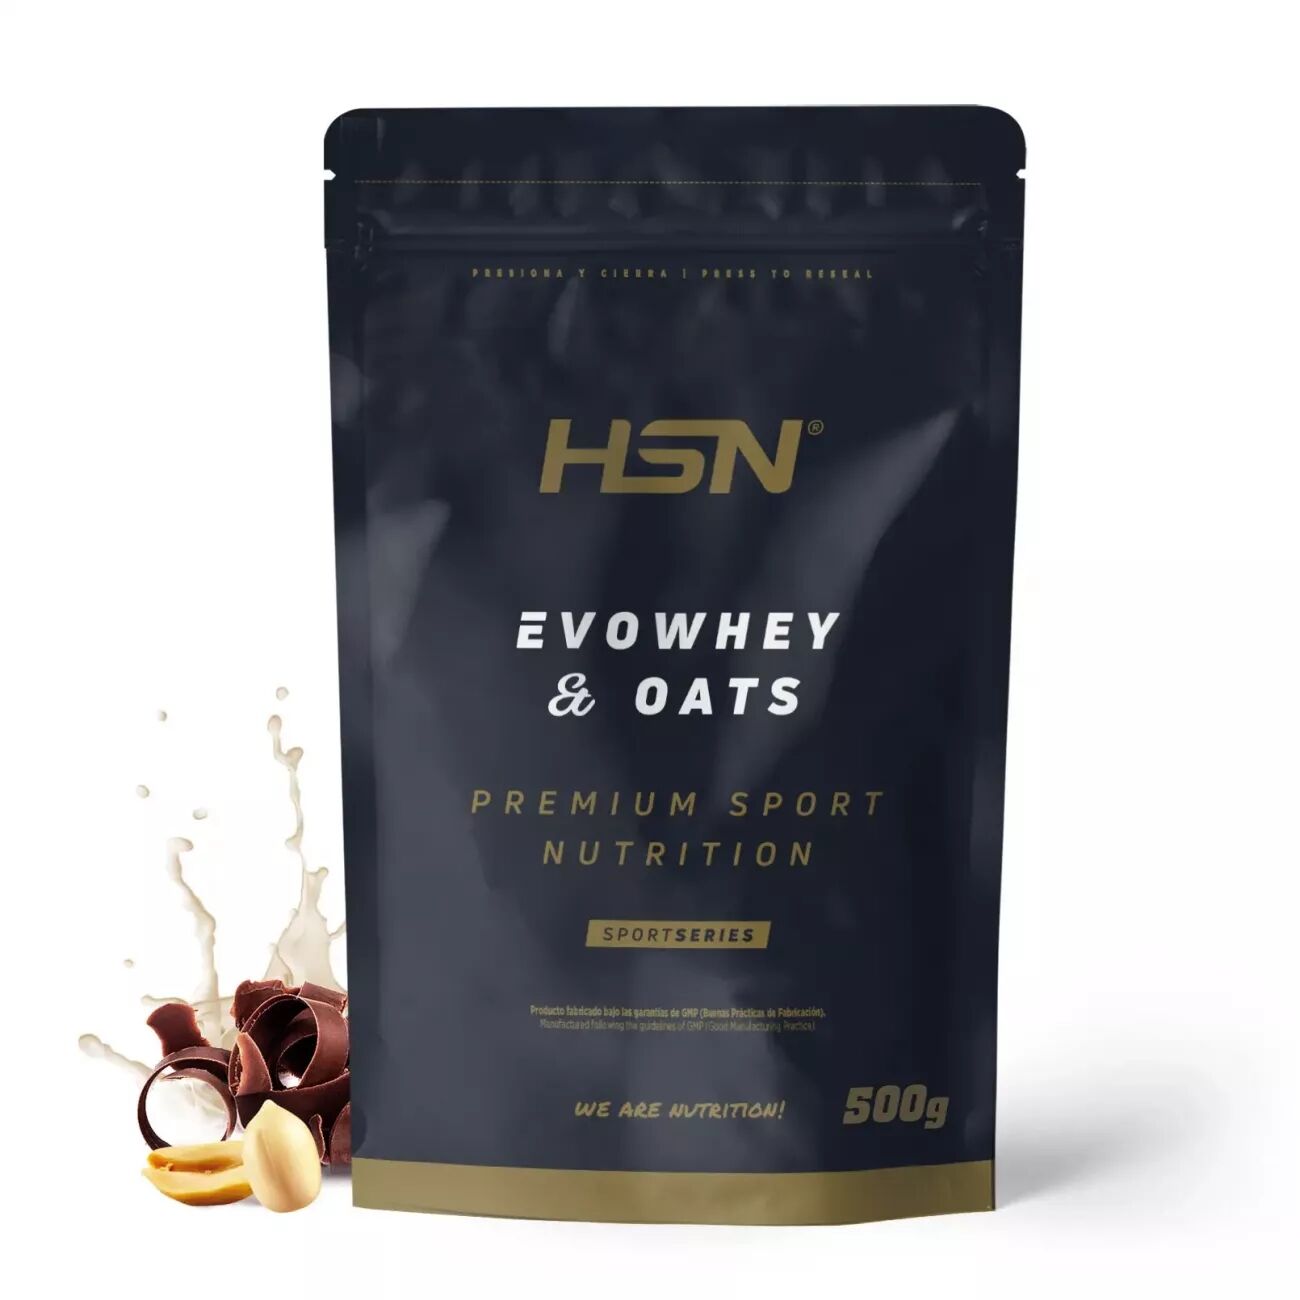 HSN Evowhey & oats 500g chocolate y cacahuete